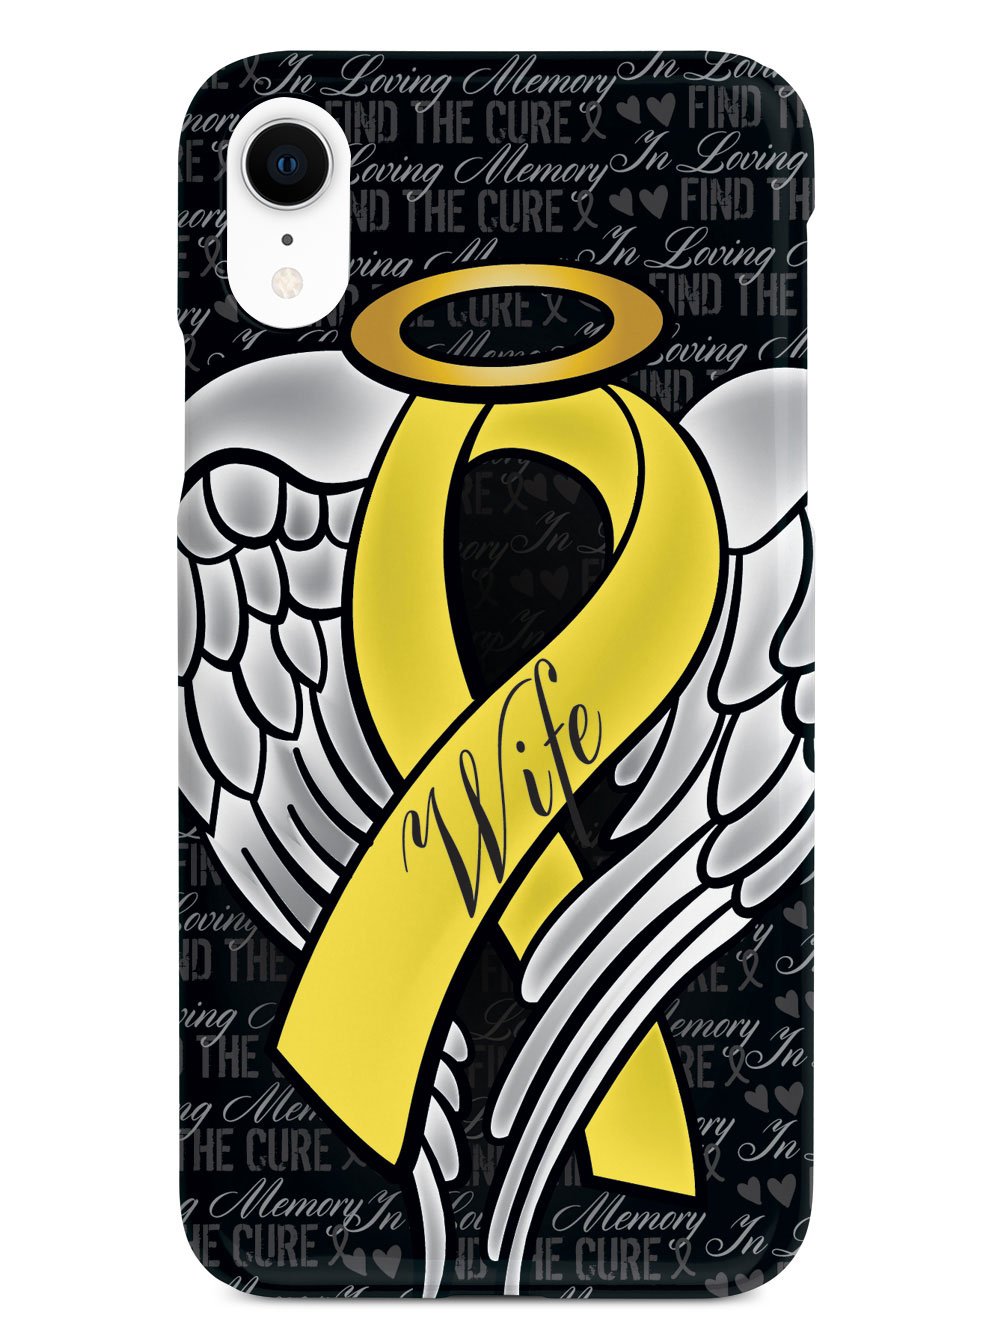 In Loving Memory of My Wife - Yellow Ribbon Case